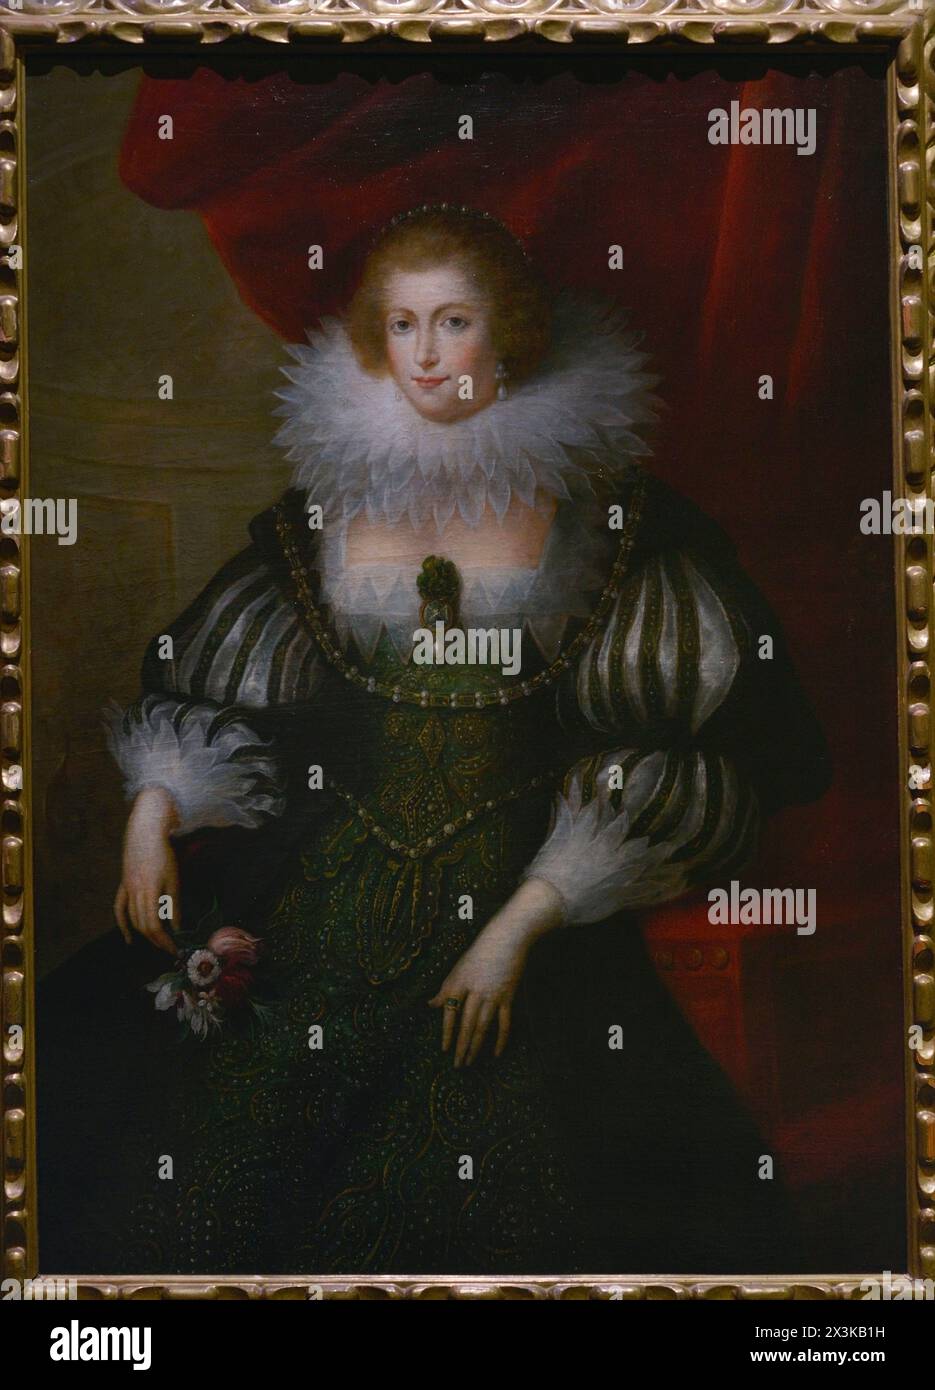 Anne of Austria (1601-1666). Queen consort of France and Navarre (1615-1643) by her marriage to King Louis XIII of France. Queen regent from 1643 to 1651. Infanta of Spain and Portugal as the daughter of King Philip III of Spain and Archduchess Margaret of Austria. Anonymous portrait based on a painting in the Louvre Museum that reproduces a lost original by Rubens, painted ca. 1620-1625. Oil on canvas. Museum of Santa Cruz. Toledo. Spain. Stock Photo